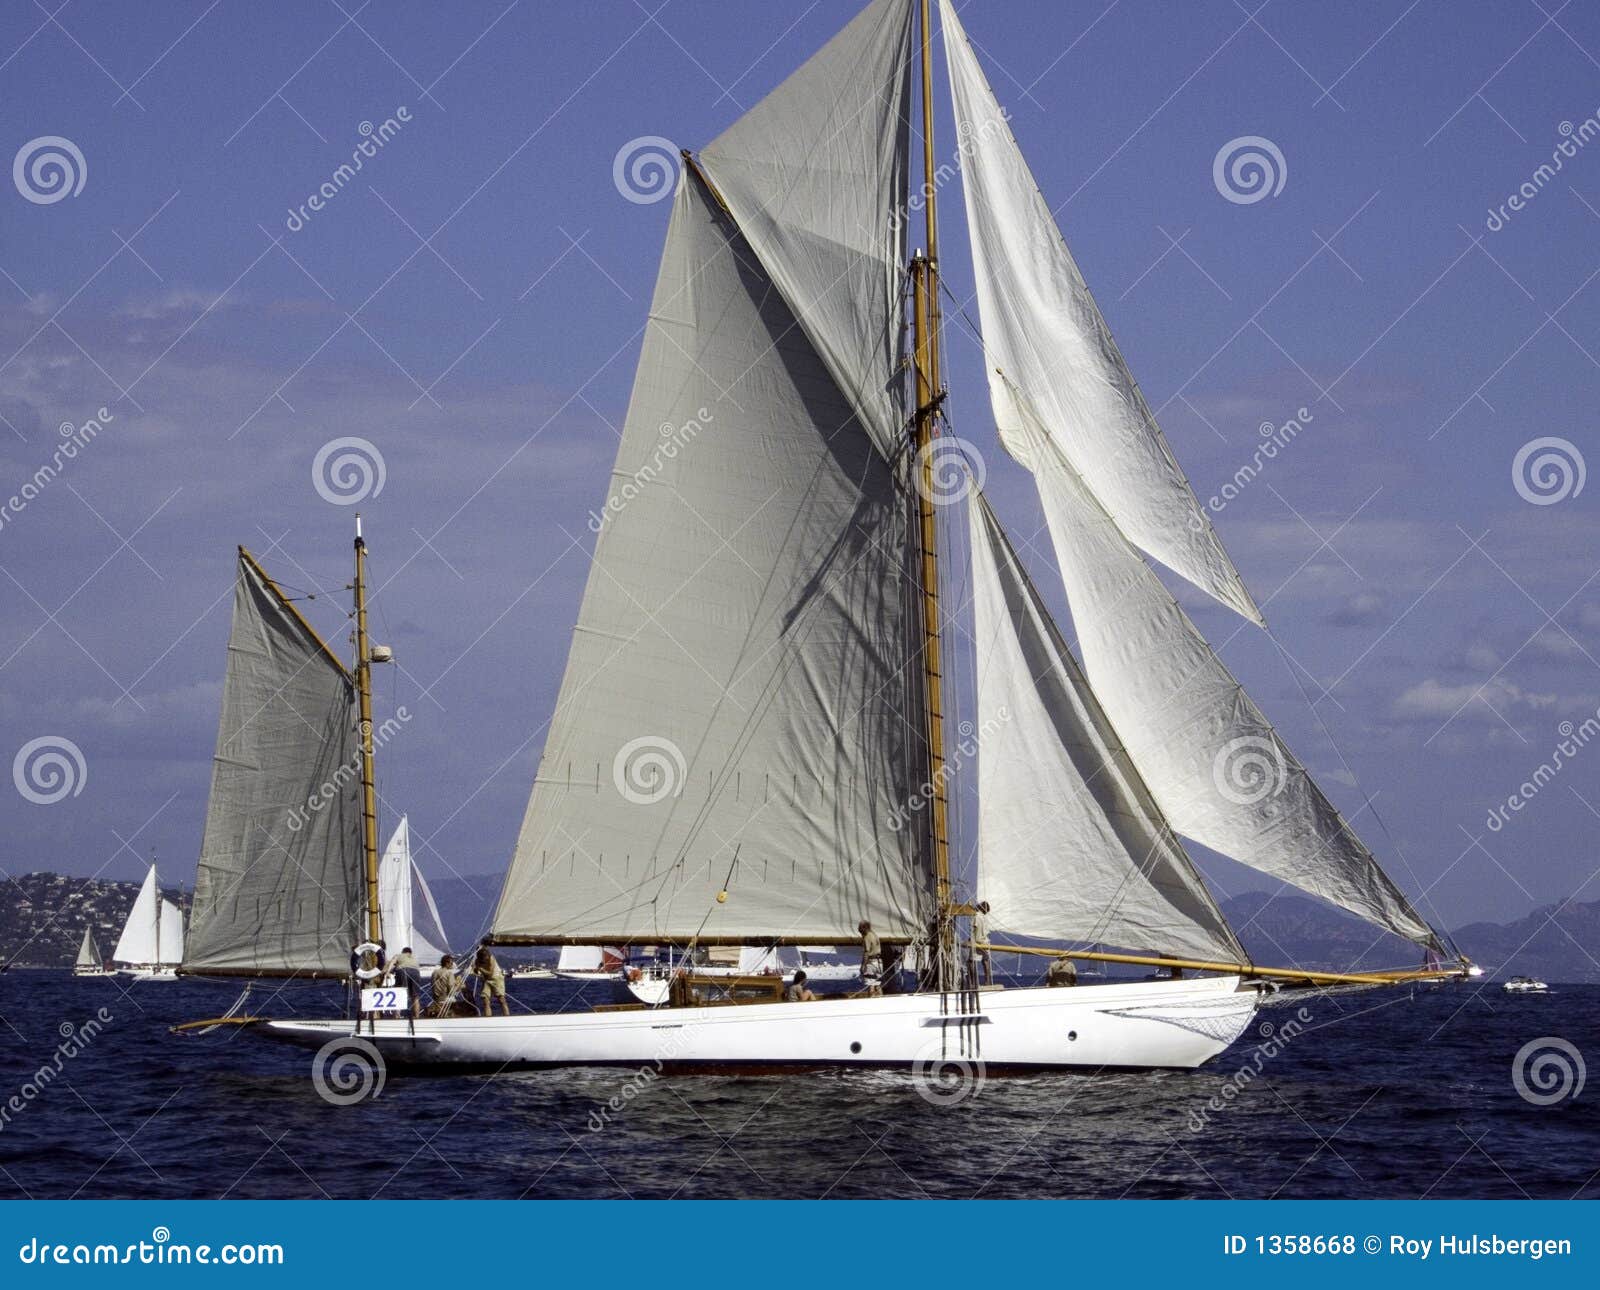 Gaff Rigged Yacht Royalty Free Stock Photos - Image: 1358668